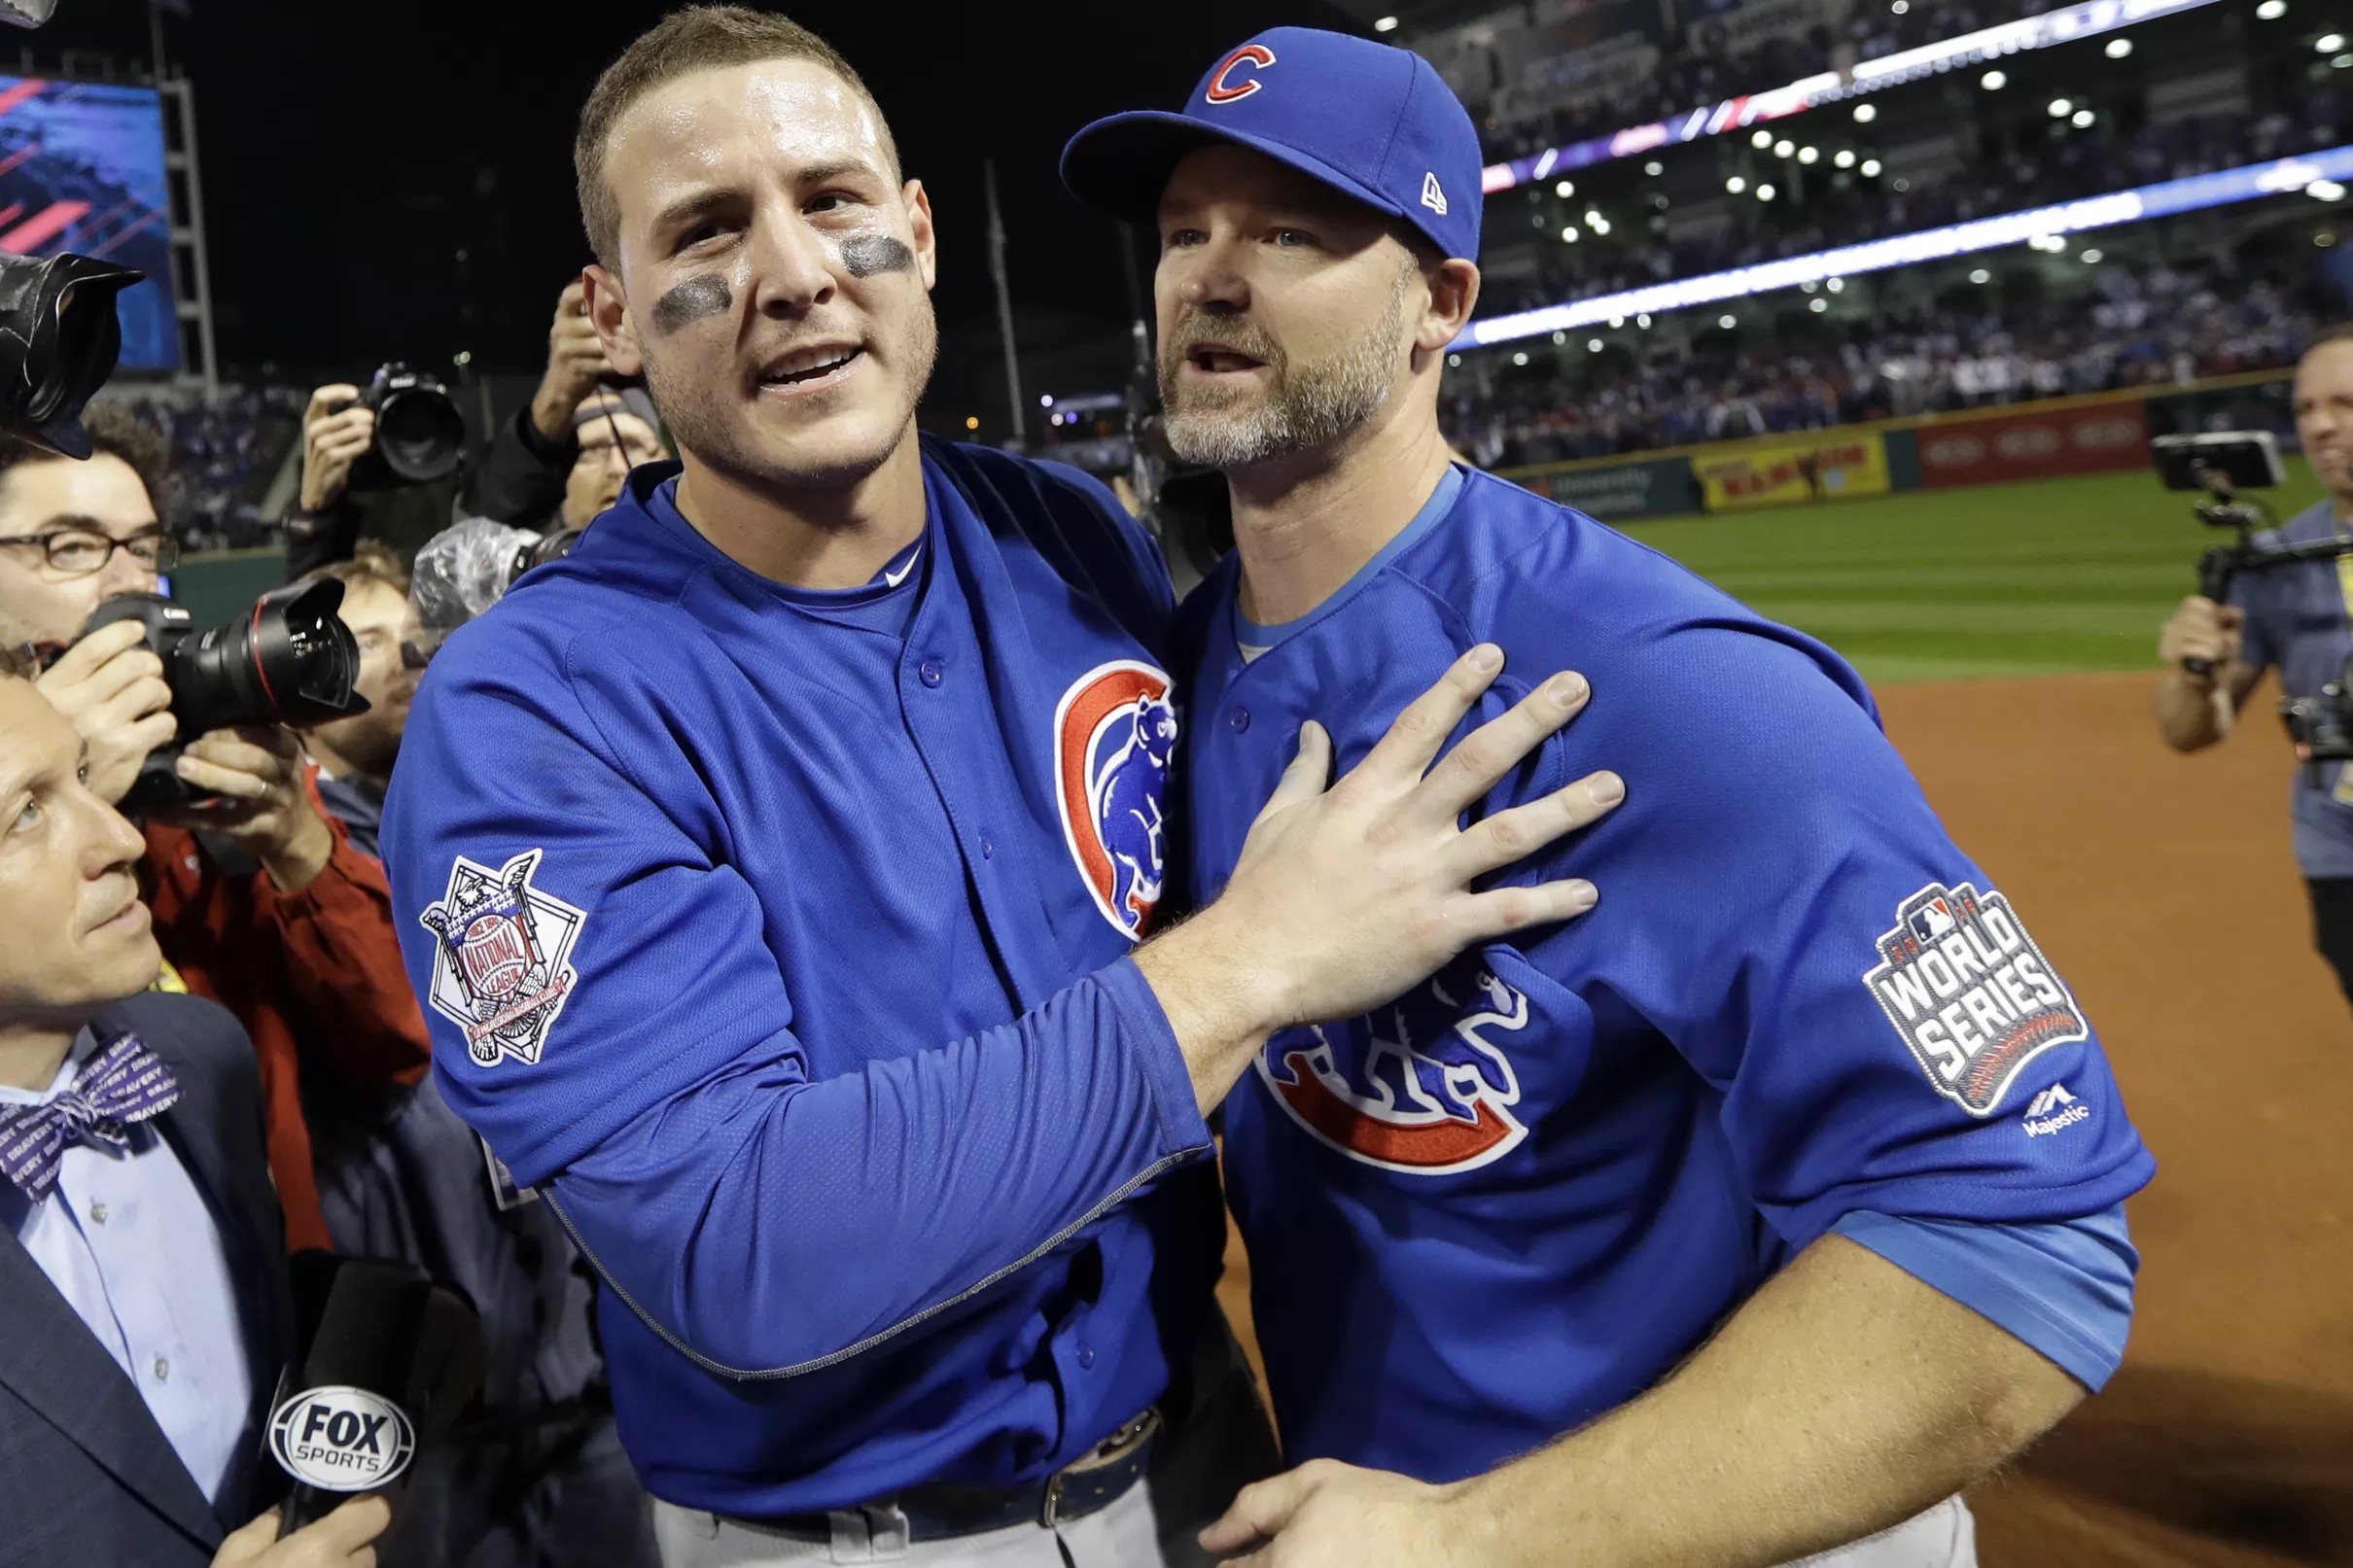 Cubs on electronic sign-stealing and 2016 championship: We were clean